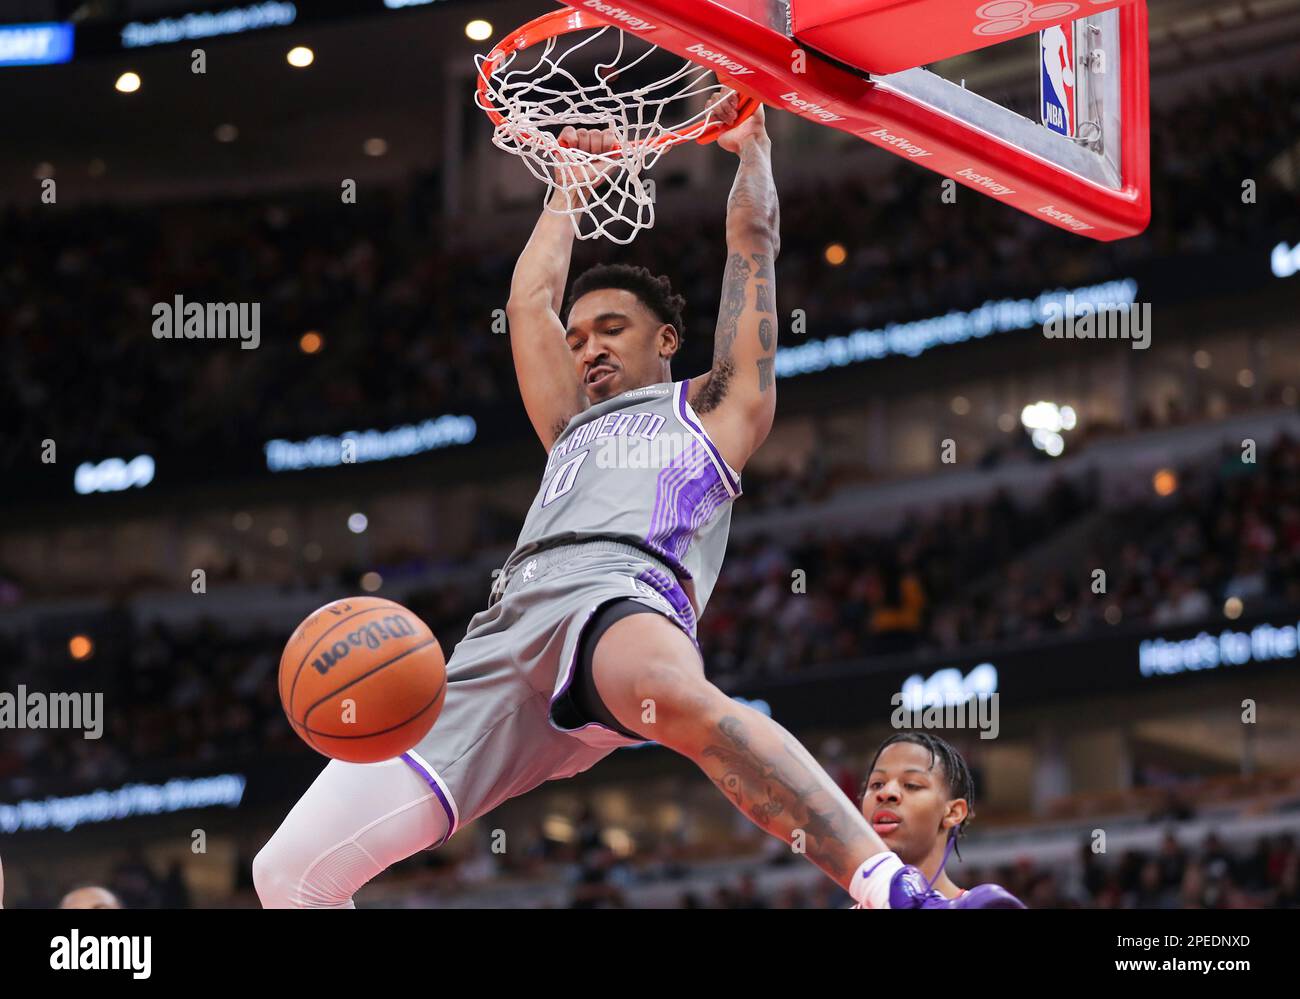 CHICAGO, IL - MARCH 15: Sacramento Kings guard Malik Monk (0) slam dunks  during a NBA game between the Sacramento Kings and the Chicago Bulls on  March 15, 2023 at the United